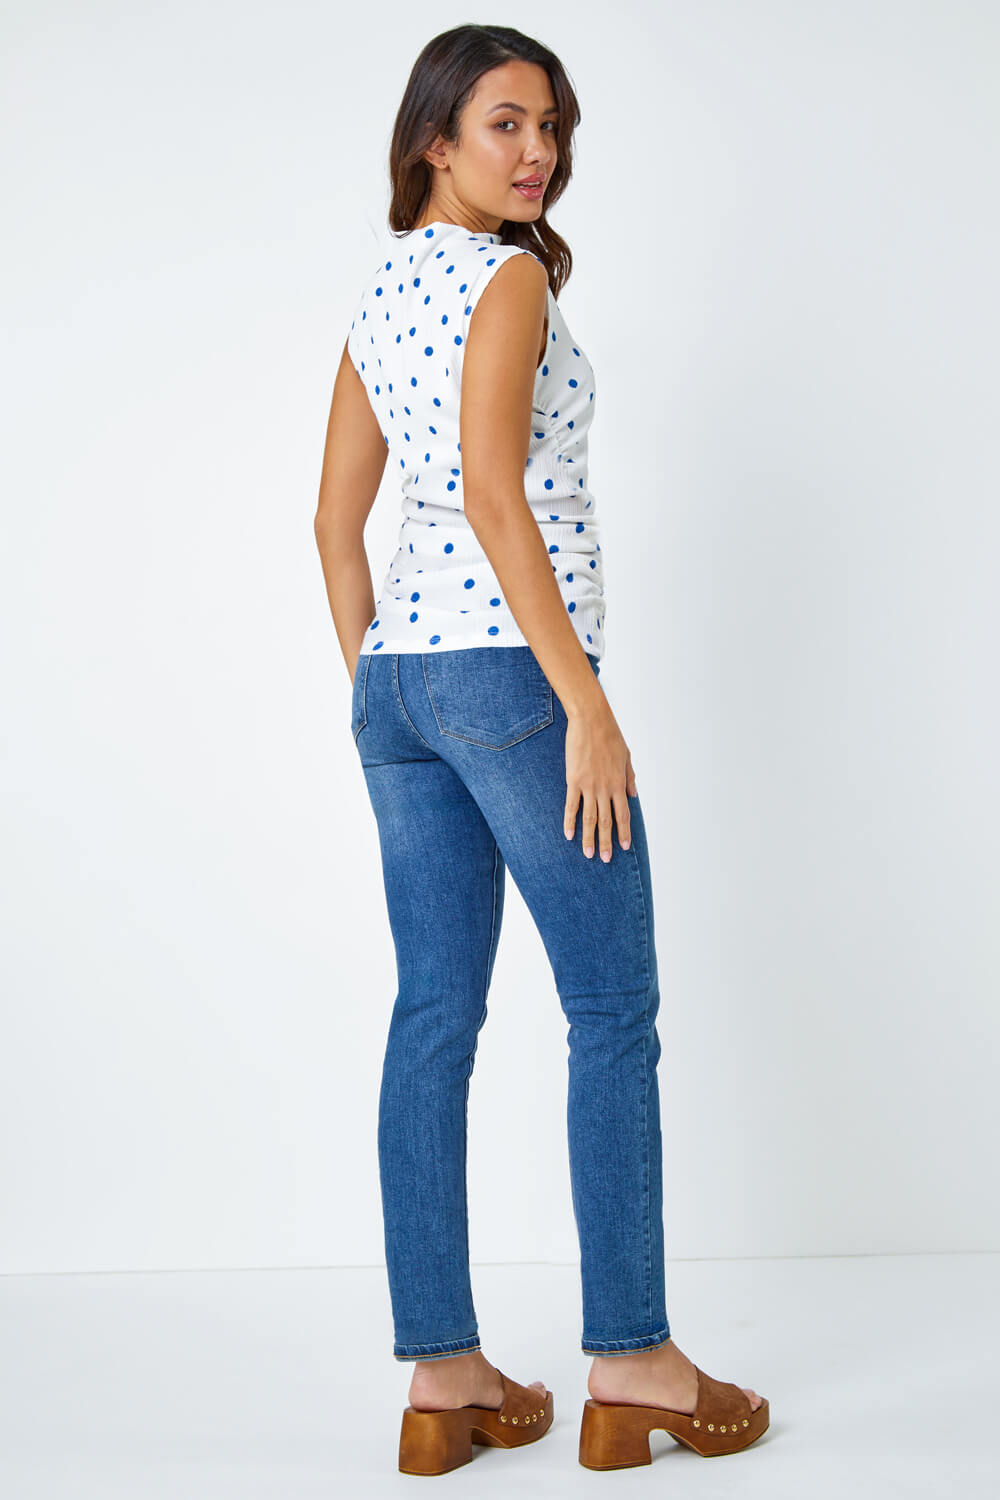 Blue Polka Dot Ruched Stretch Top, Image 3 of 5